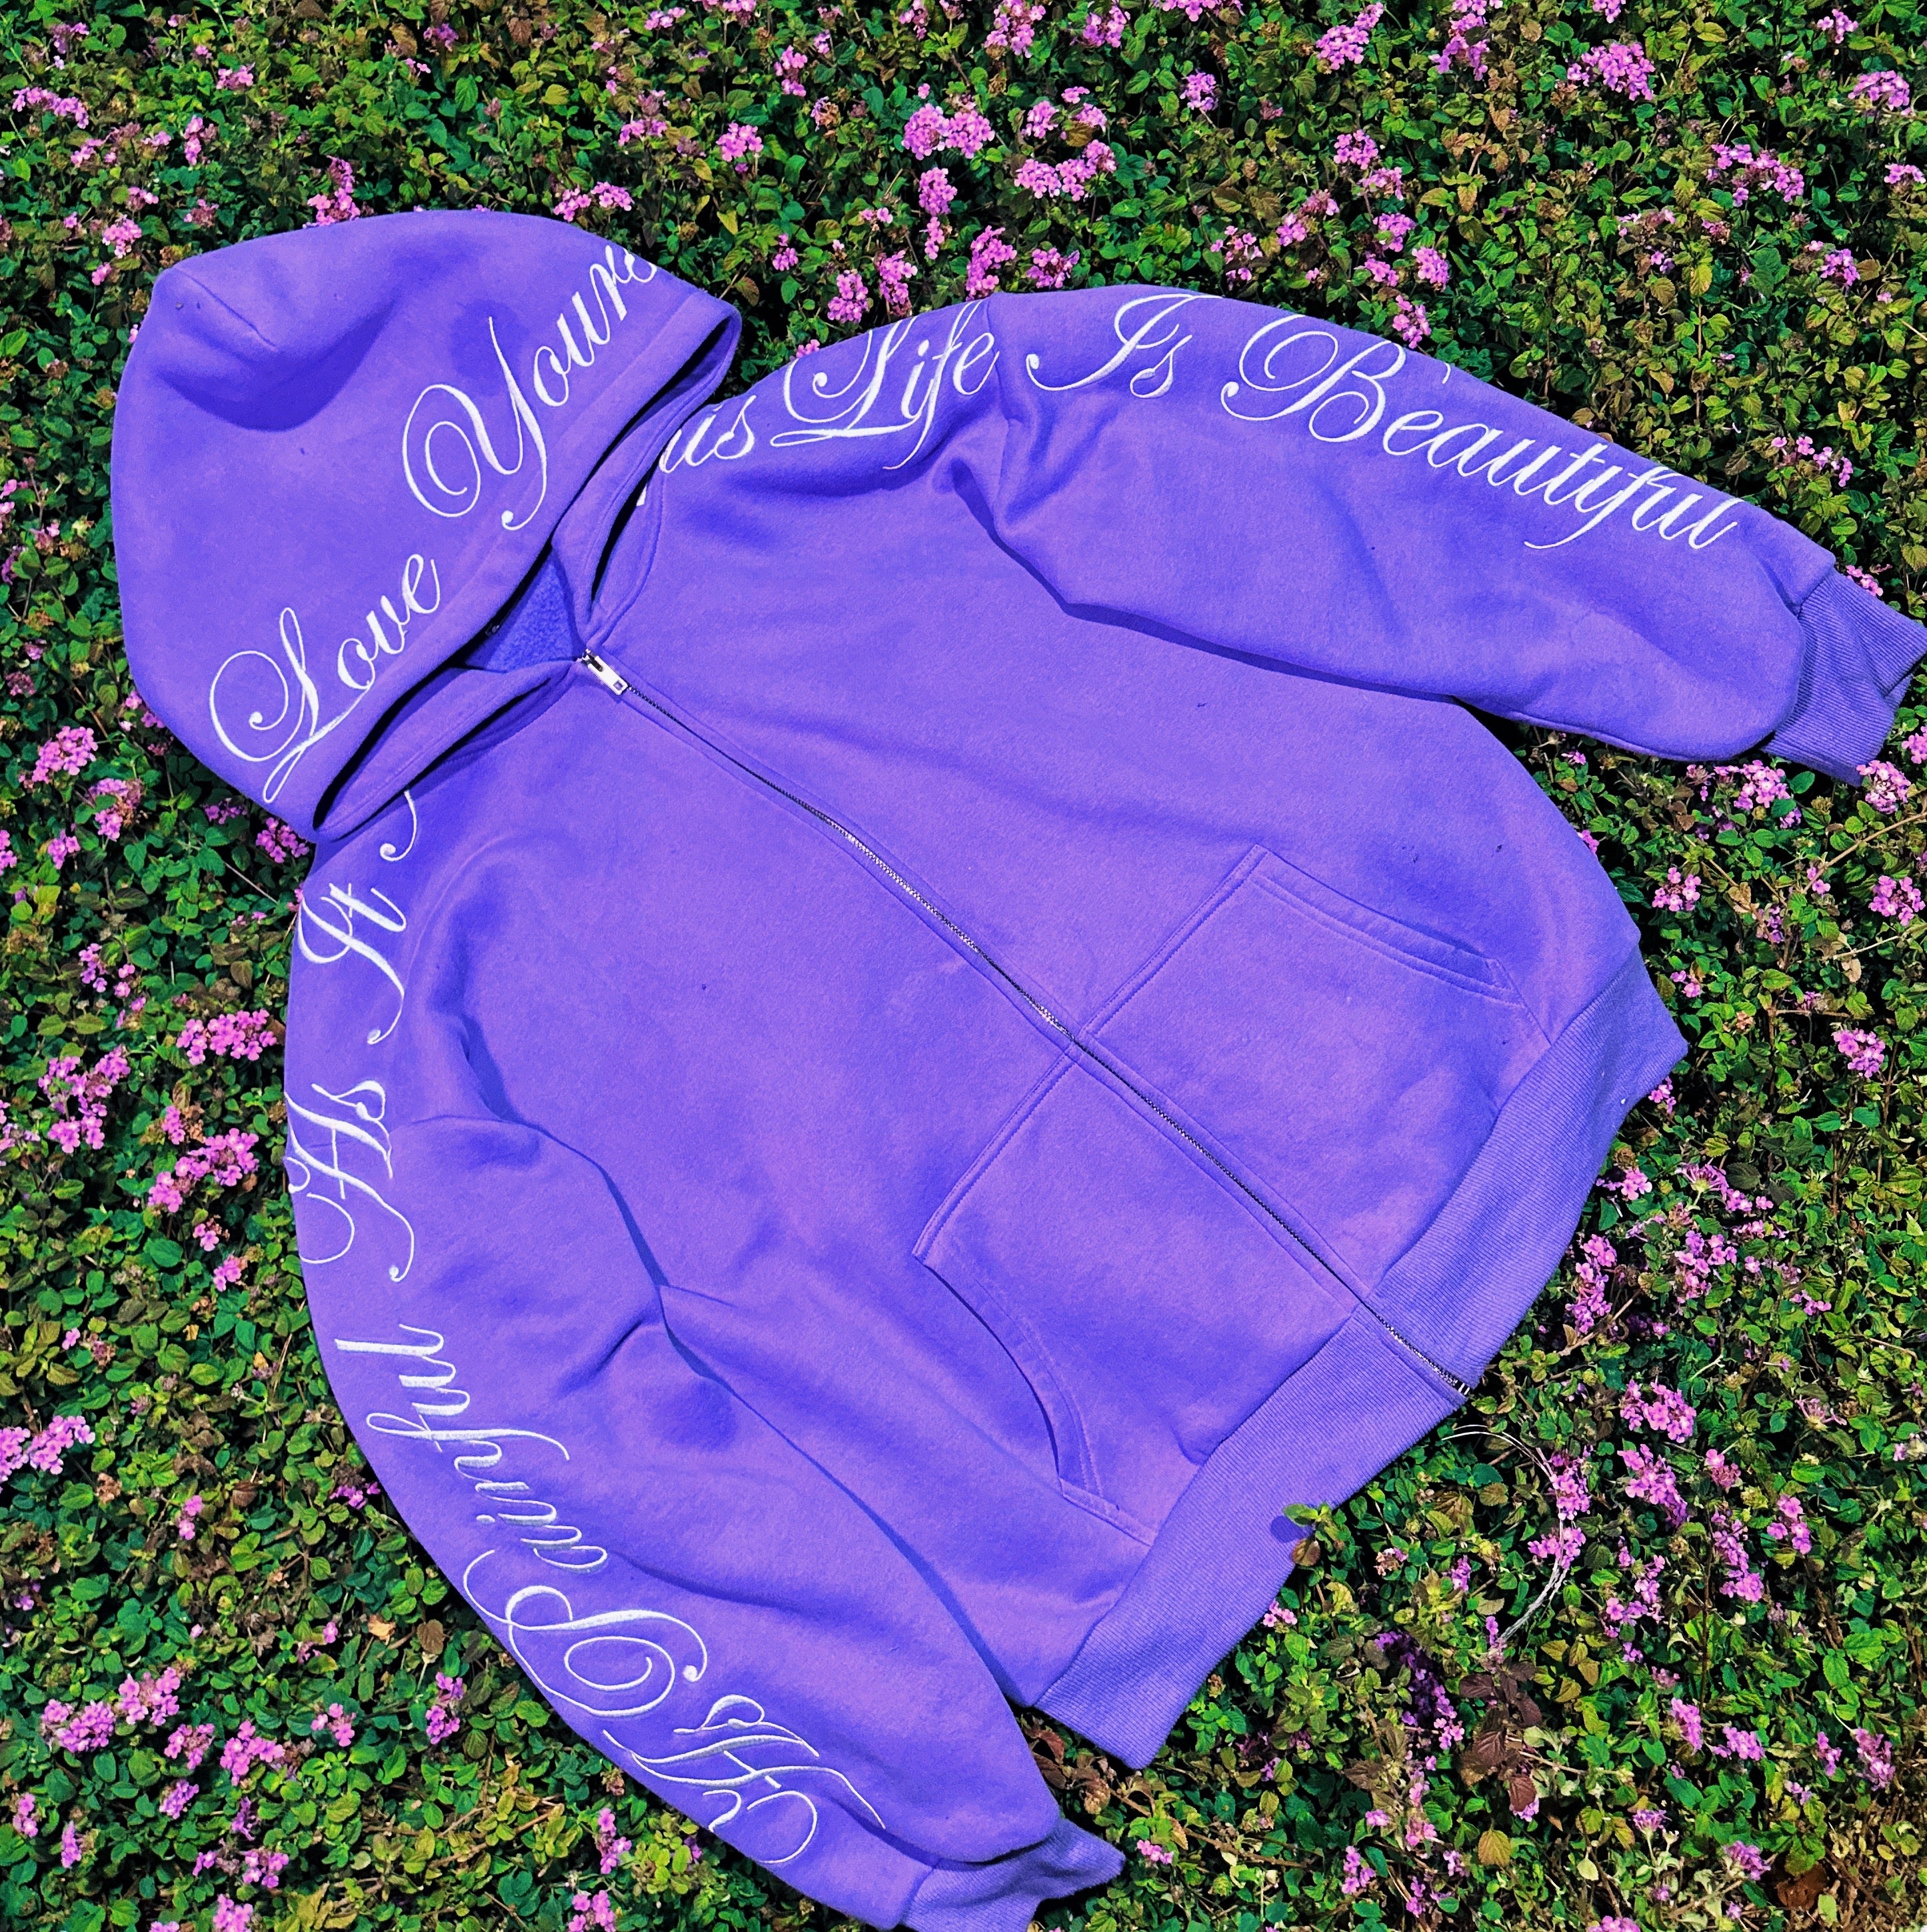 LOVE YOURSELF EMBROIDERED ZIP-UP - LAVENDER